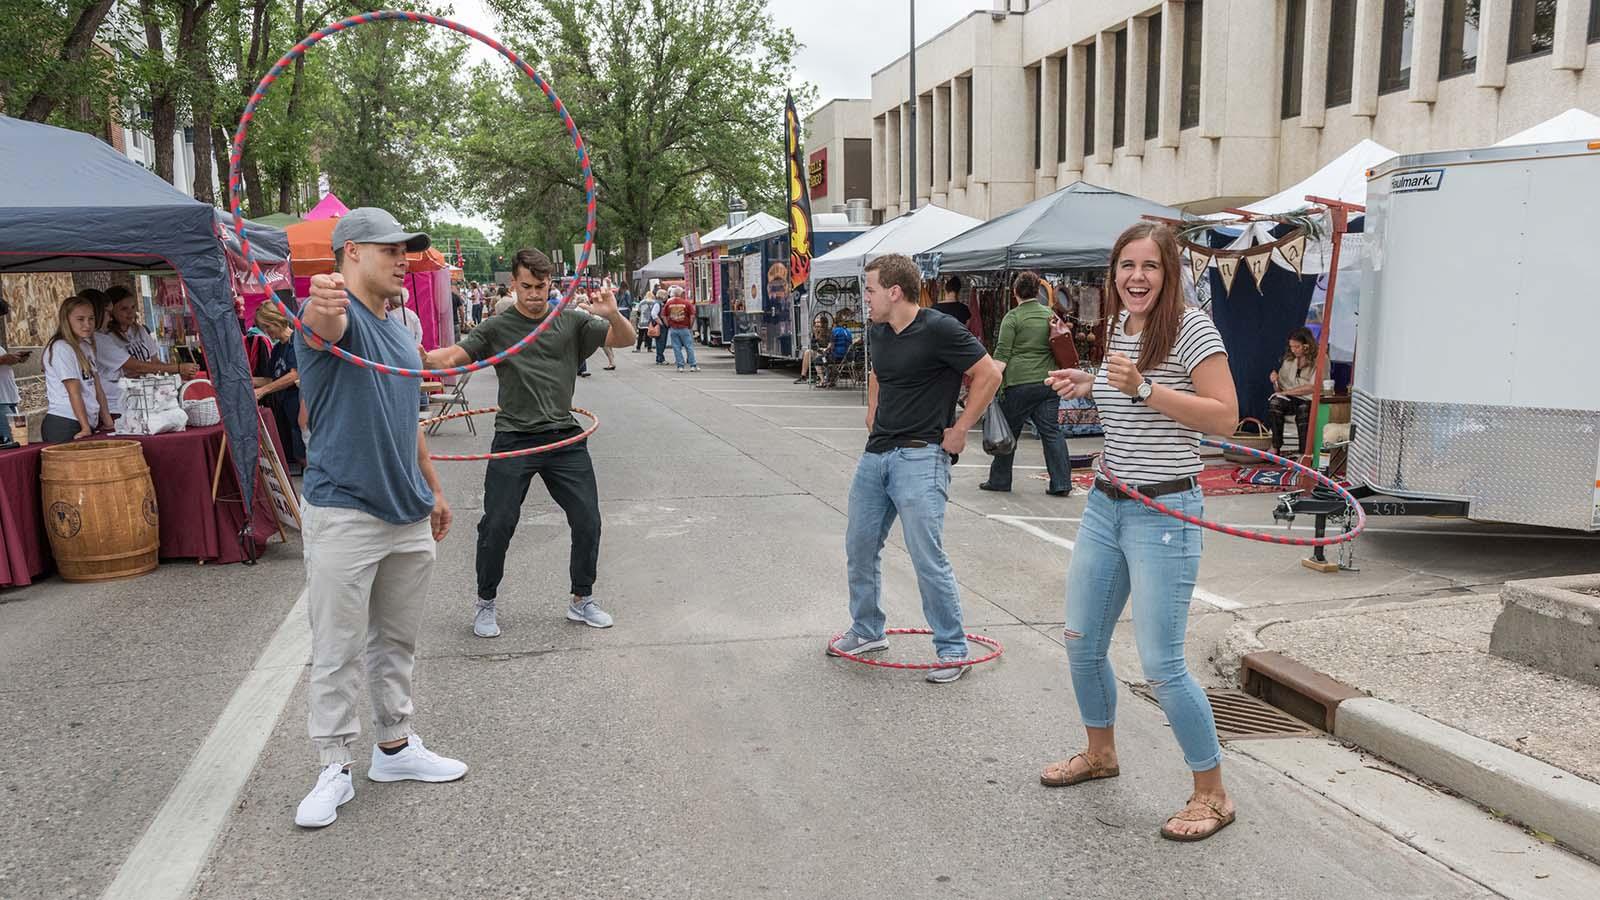 Group of University of Mary students hula hooping at downtown Bismarck street fair